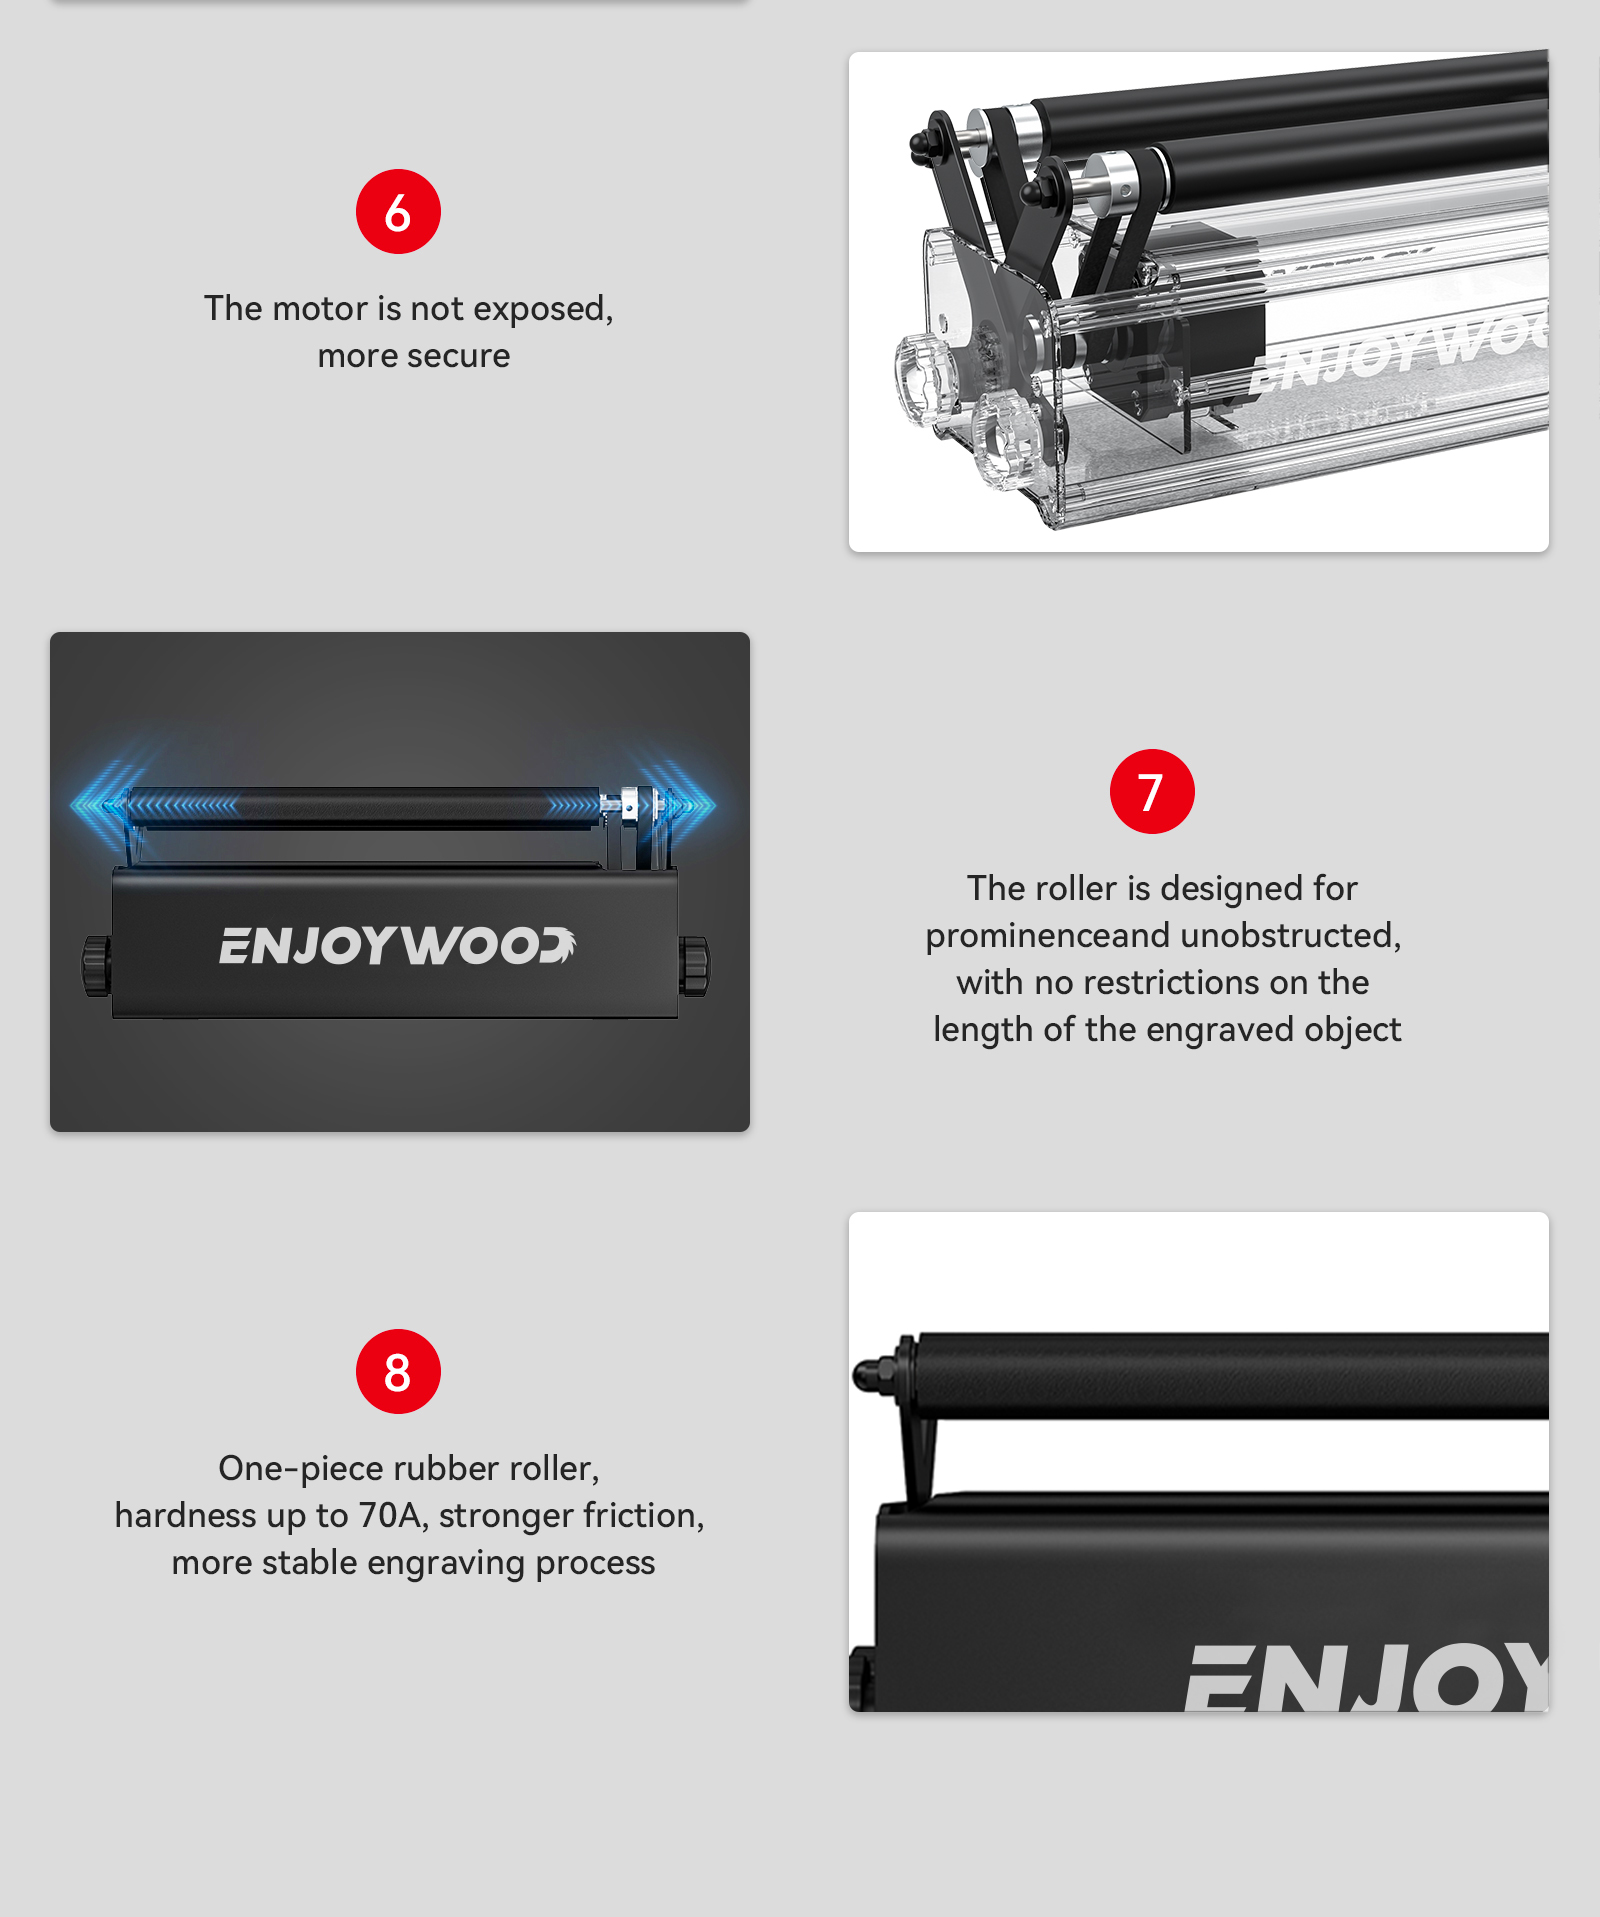 ENJOYWOOD R3 PRO Rotary Roller with Separable Support Module and Extension Towers for Laser Engraver